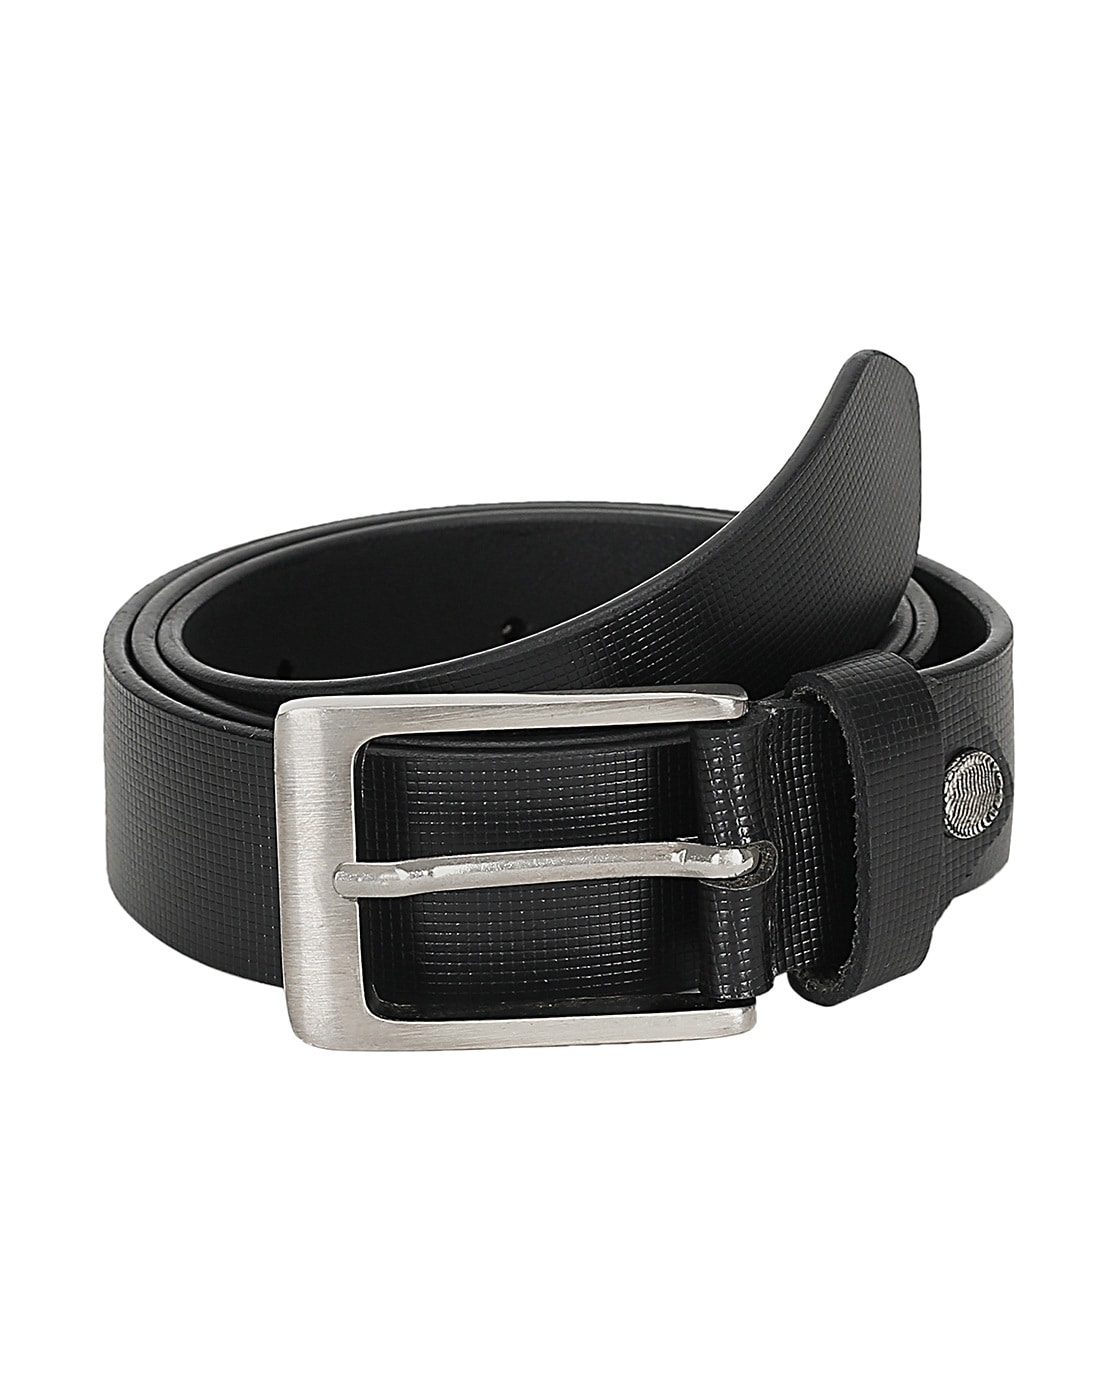 Belt with Tang Buckle Closure